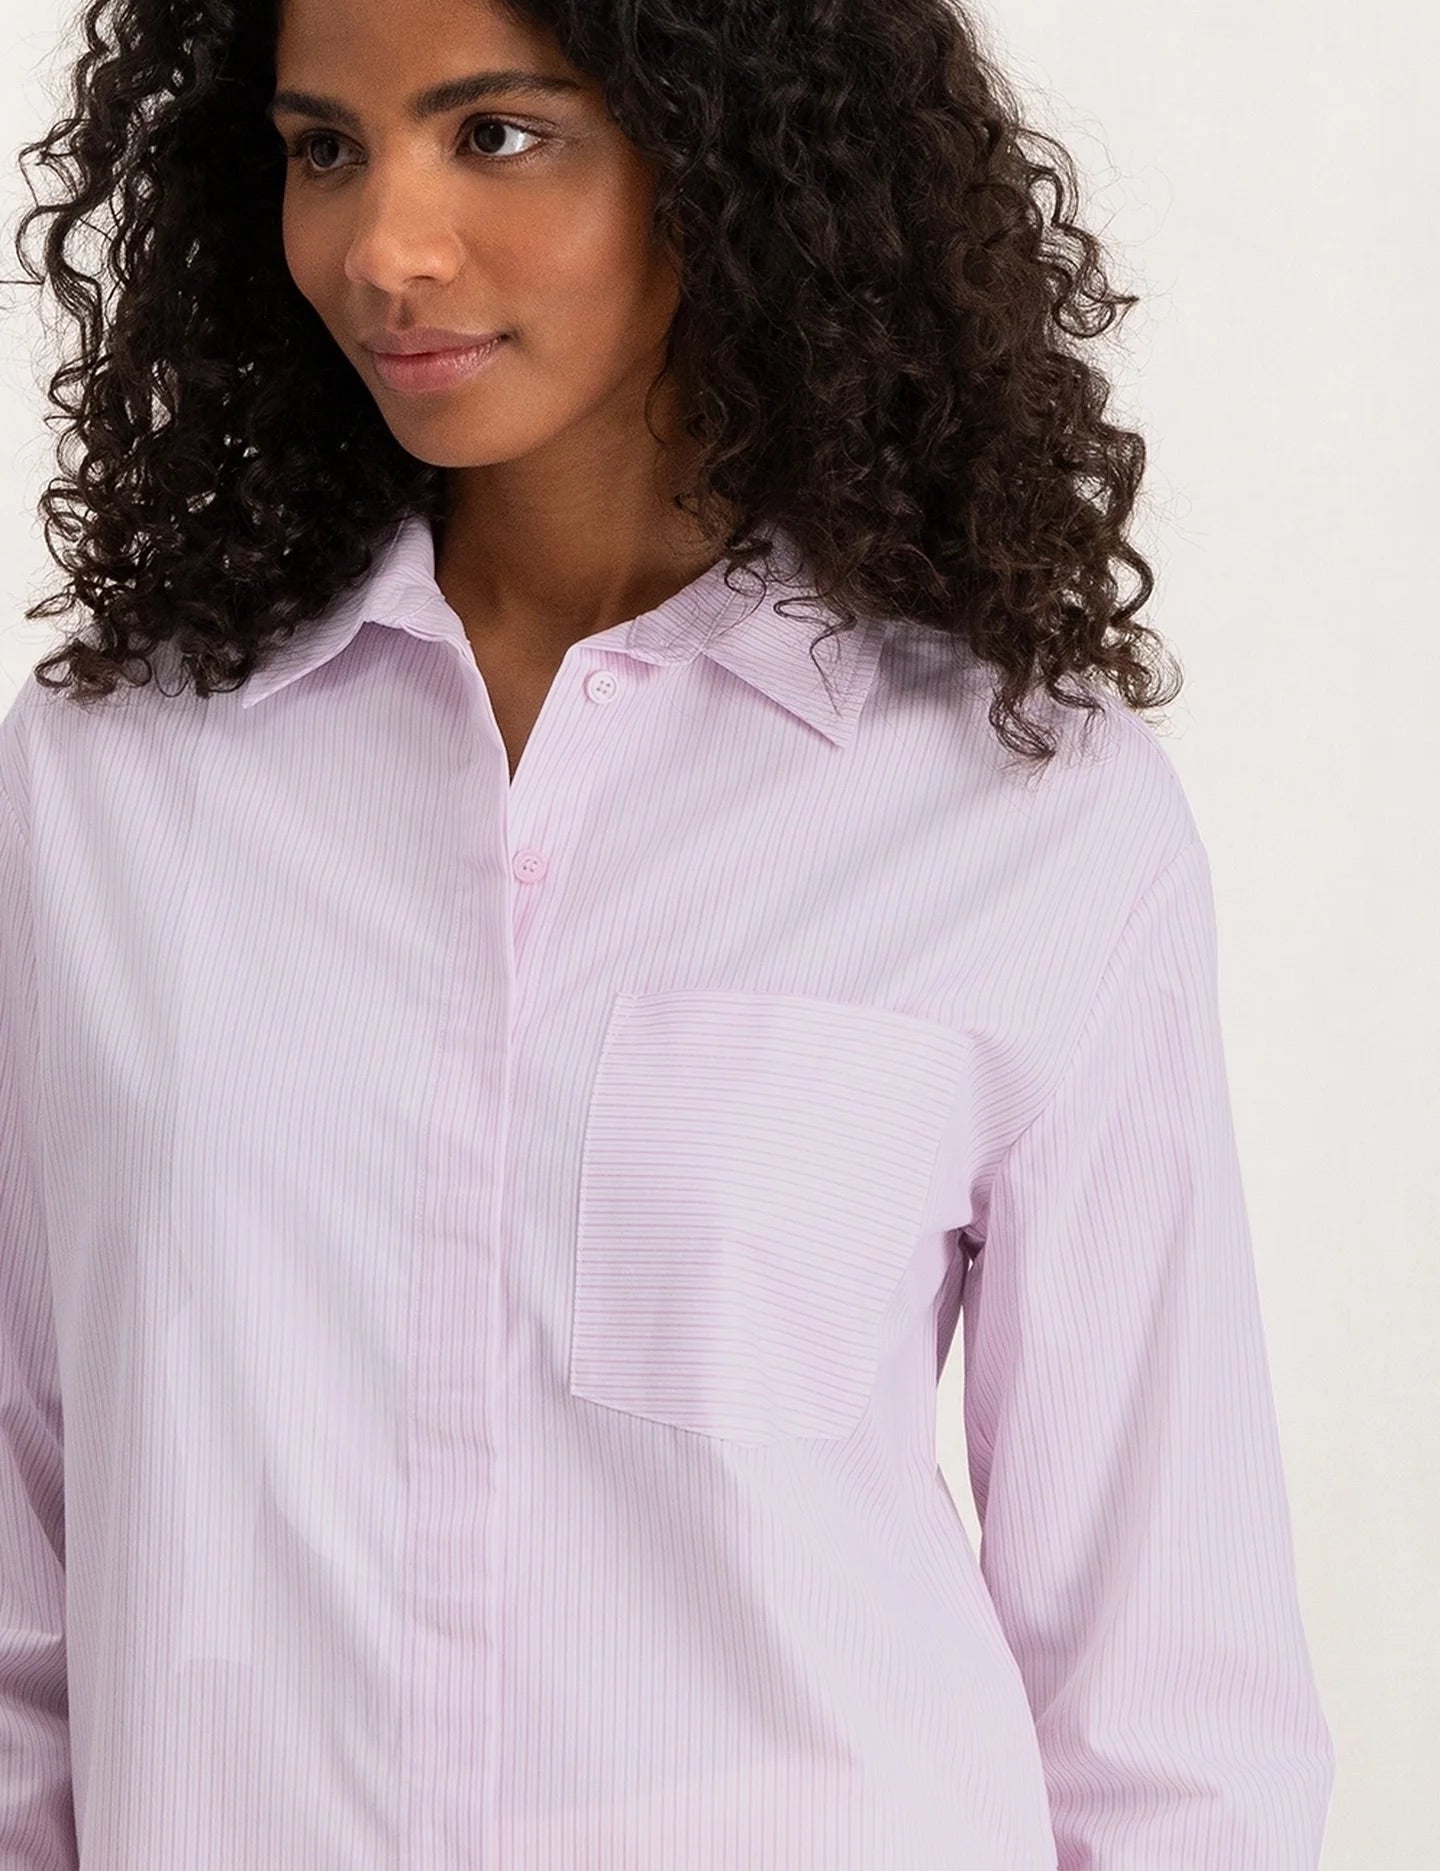 striped-blouse-with-long-sleeves-pocket-and-buttons-lady-pink-dessin_2880x_jpg.jpg